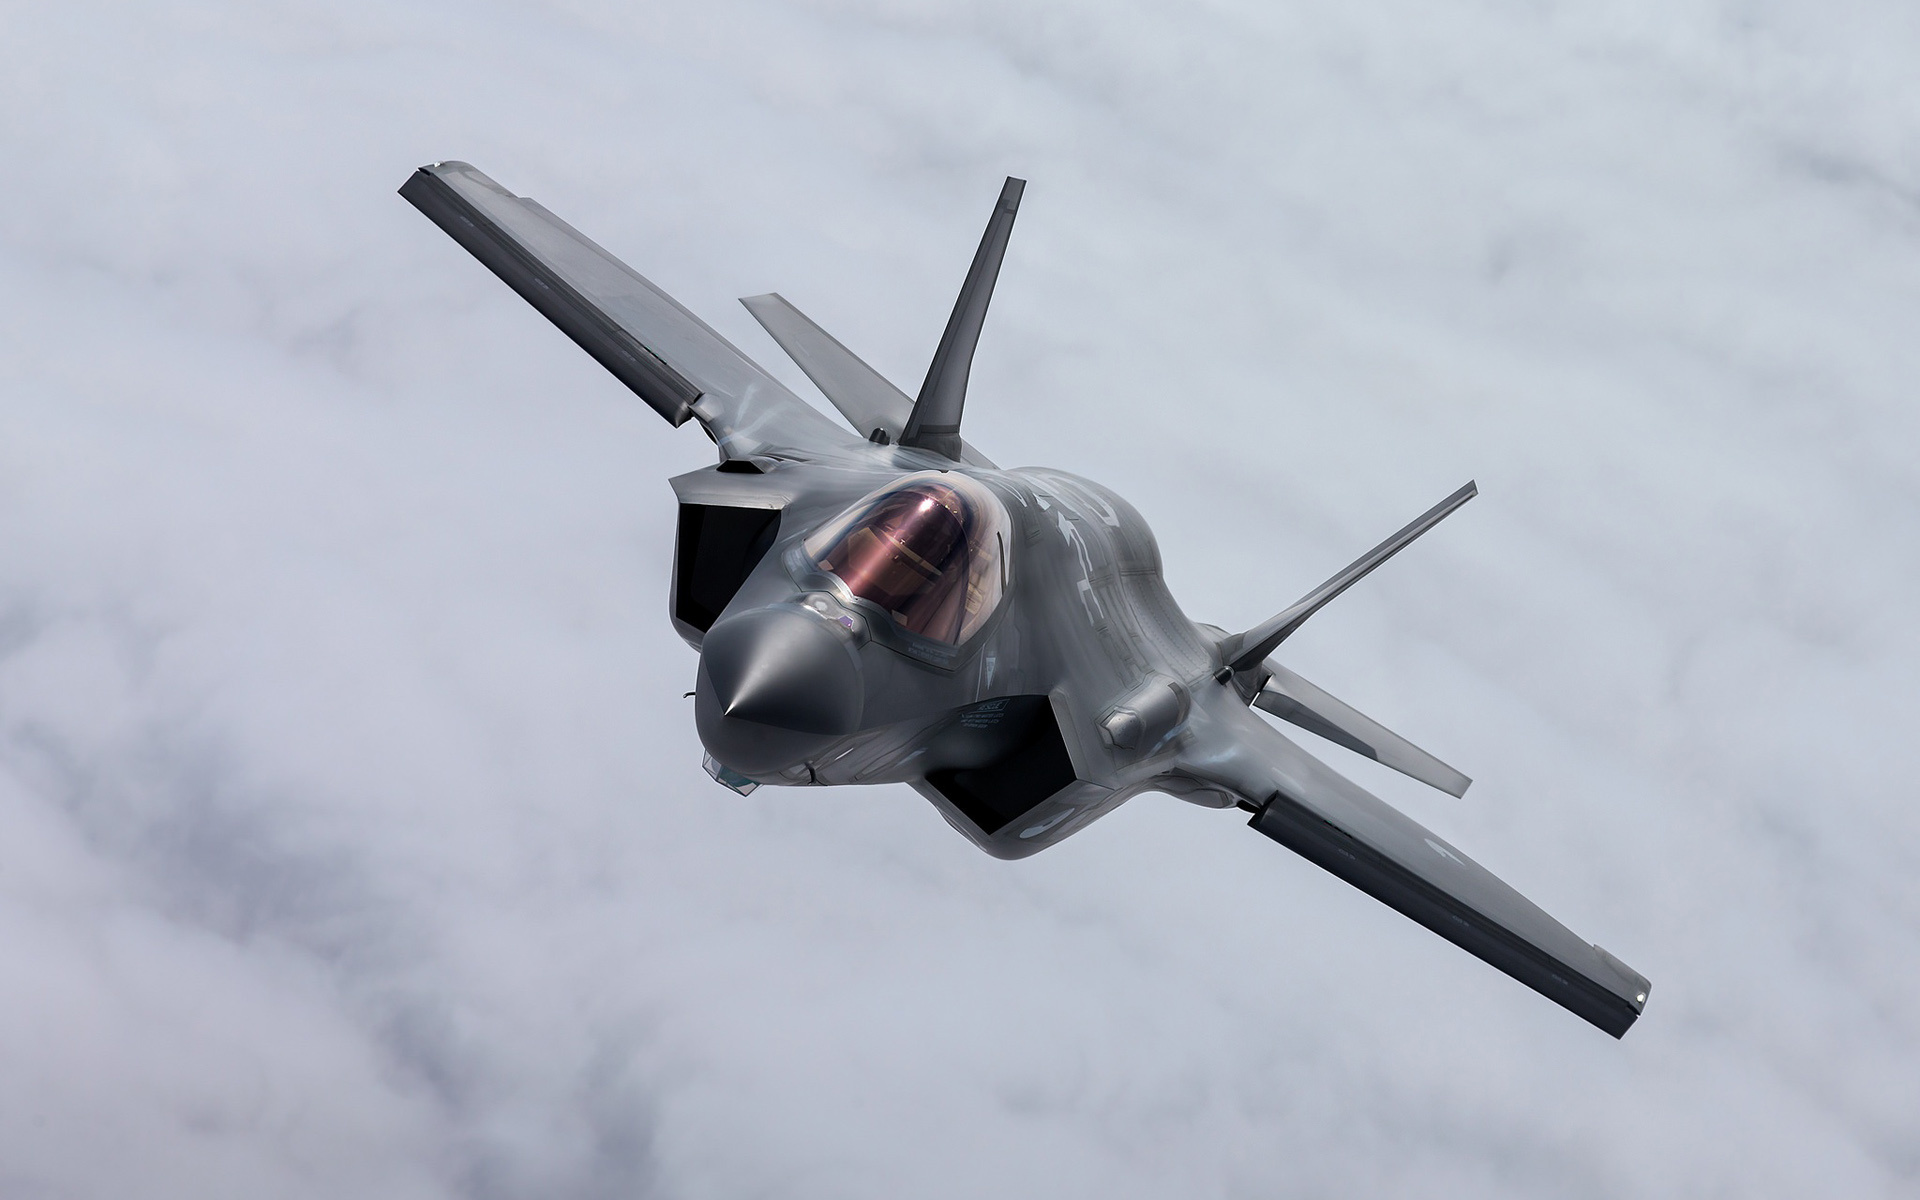 Lockheed Martin, F-35 Lightning II, Download wallpapers, High quality pictures, 1920x1200 HD Desktop